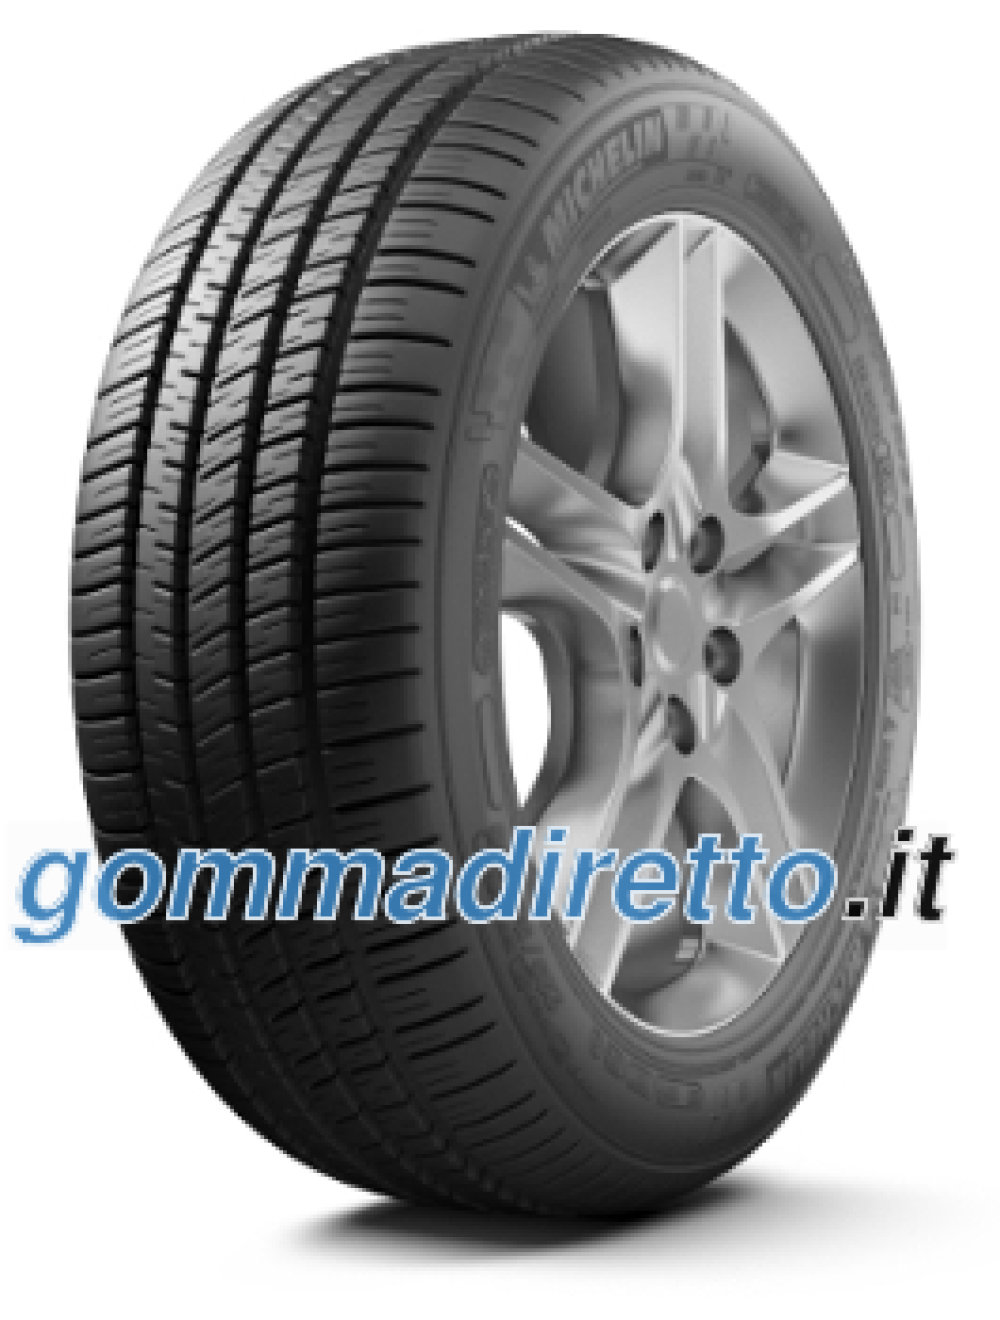 Image of Michelin Pilot Sport A/S 3 ( 275/40 R20 106V XL, N0 )